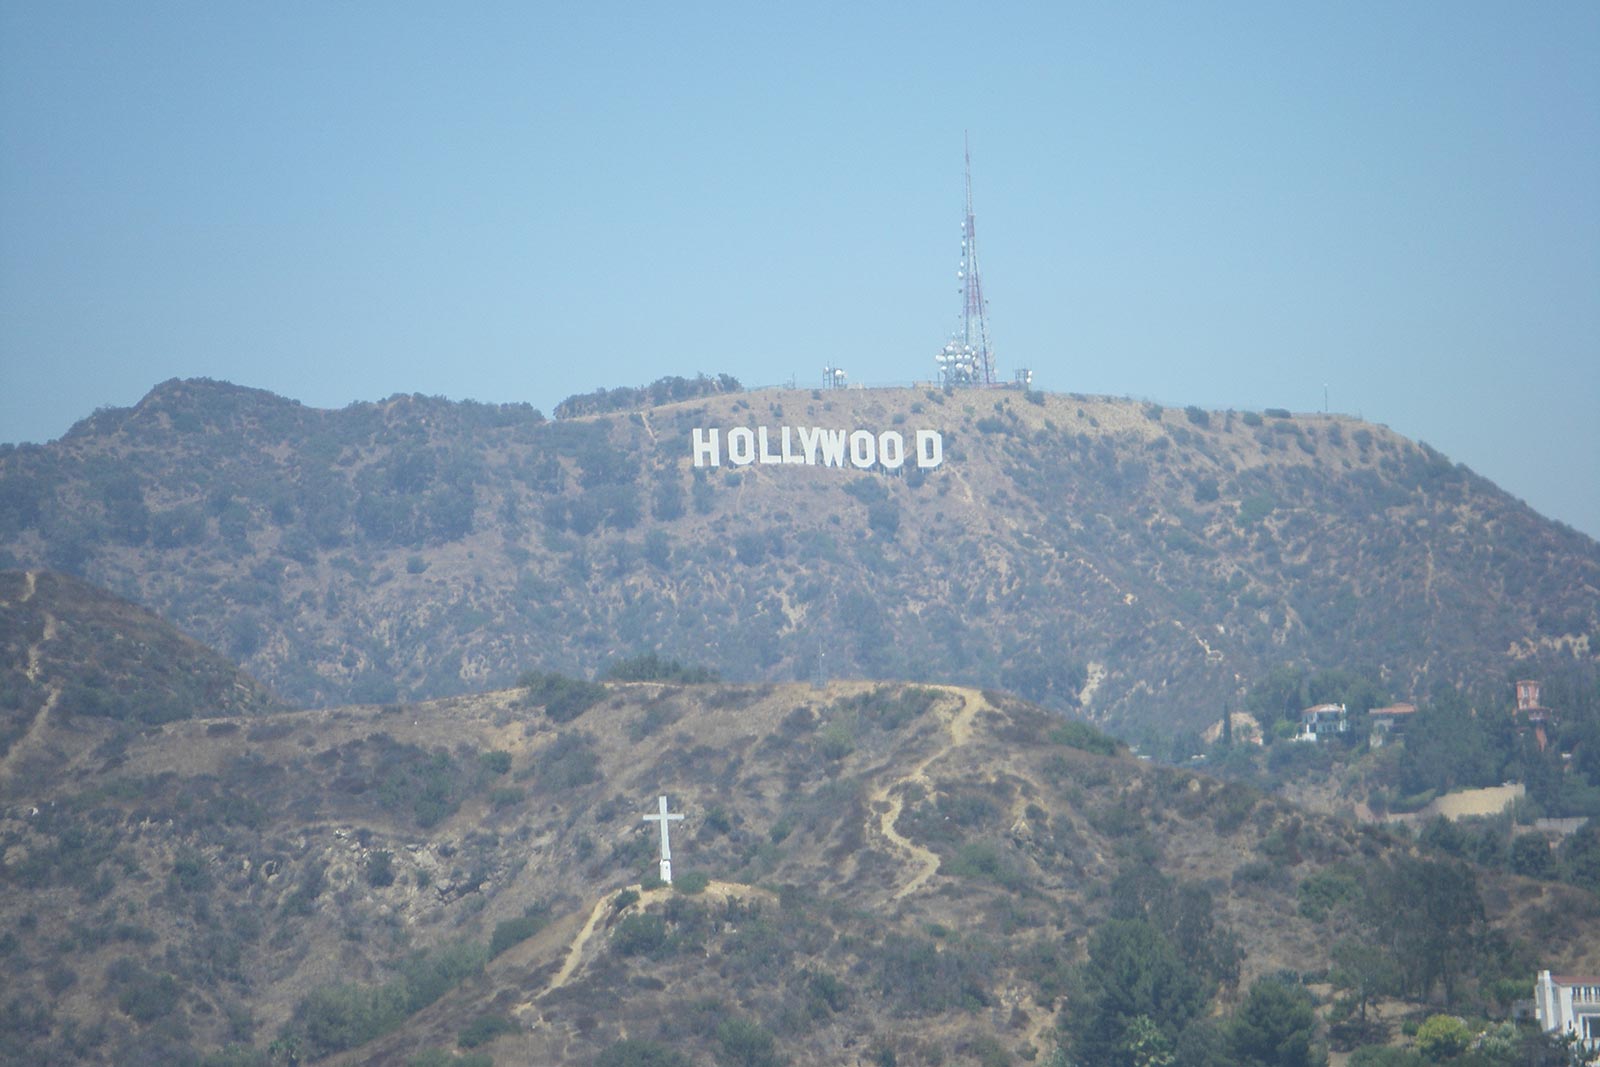 Hollywood sign in Los Angeles. LA and Six Flags for free